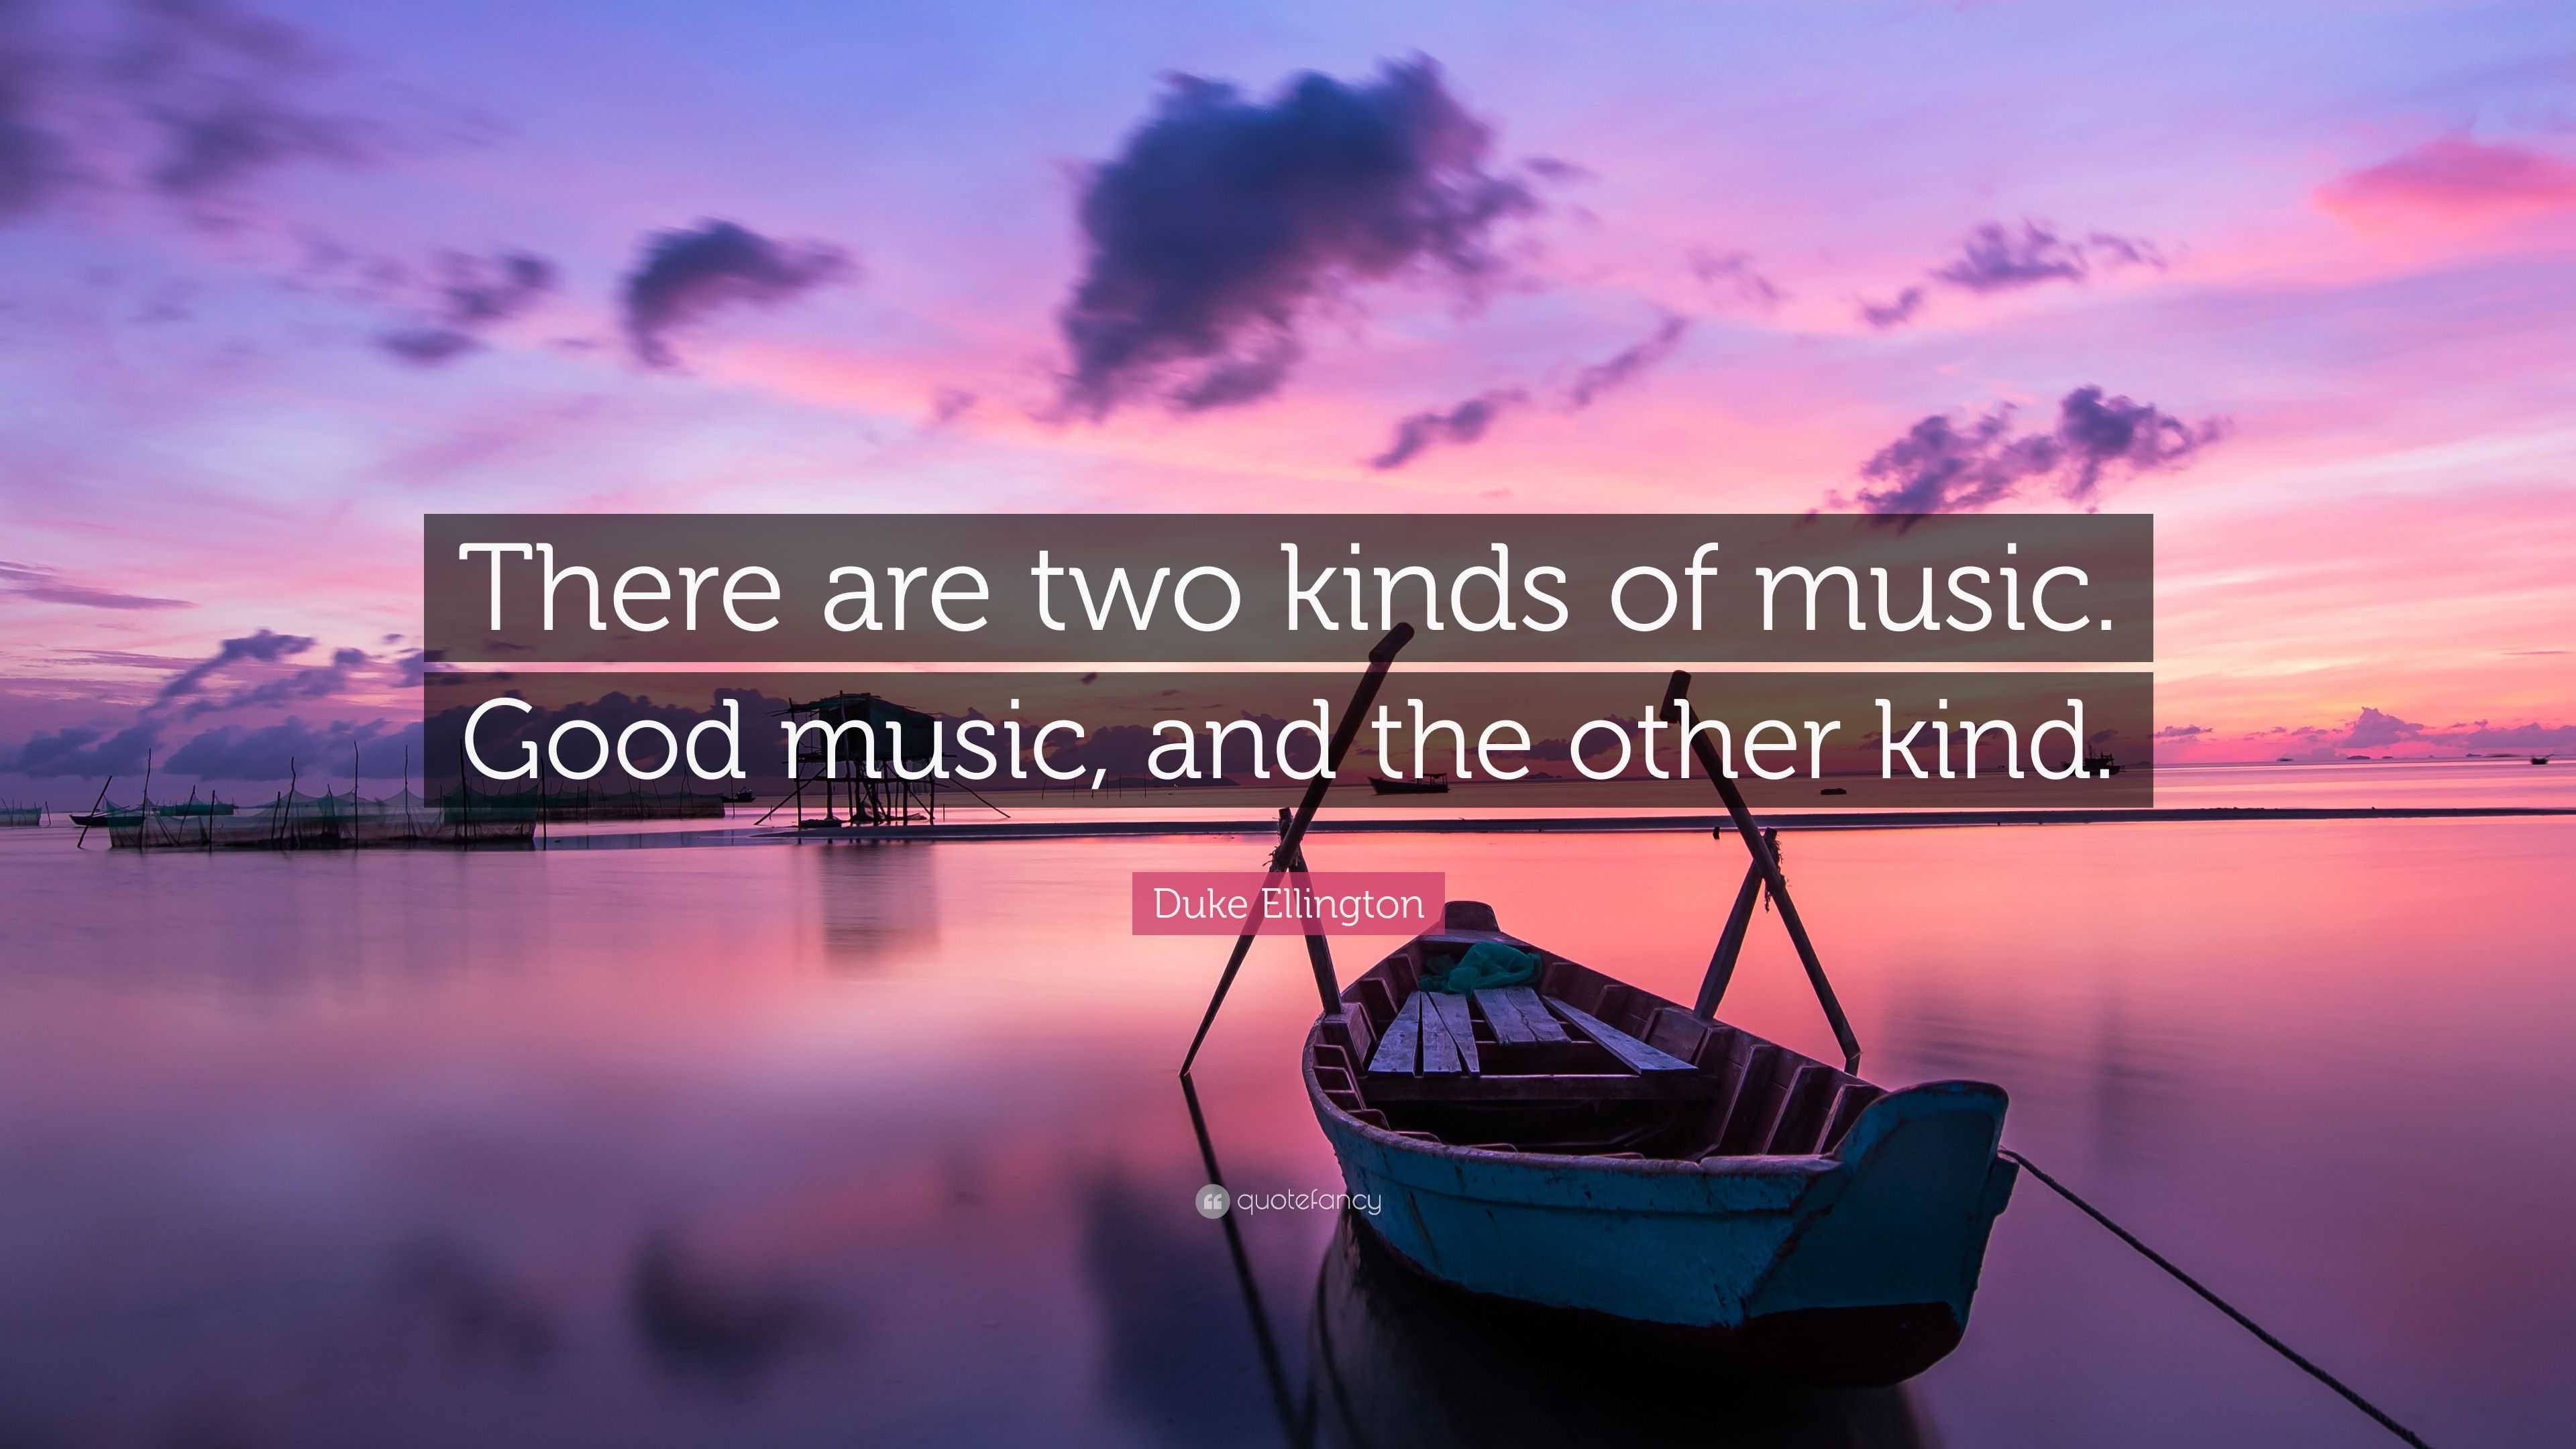 Duke Ellington Quote: “There are two kinds of music. Good music, and